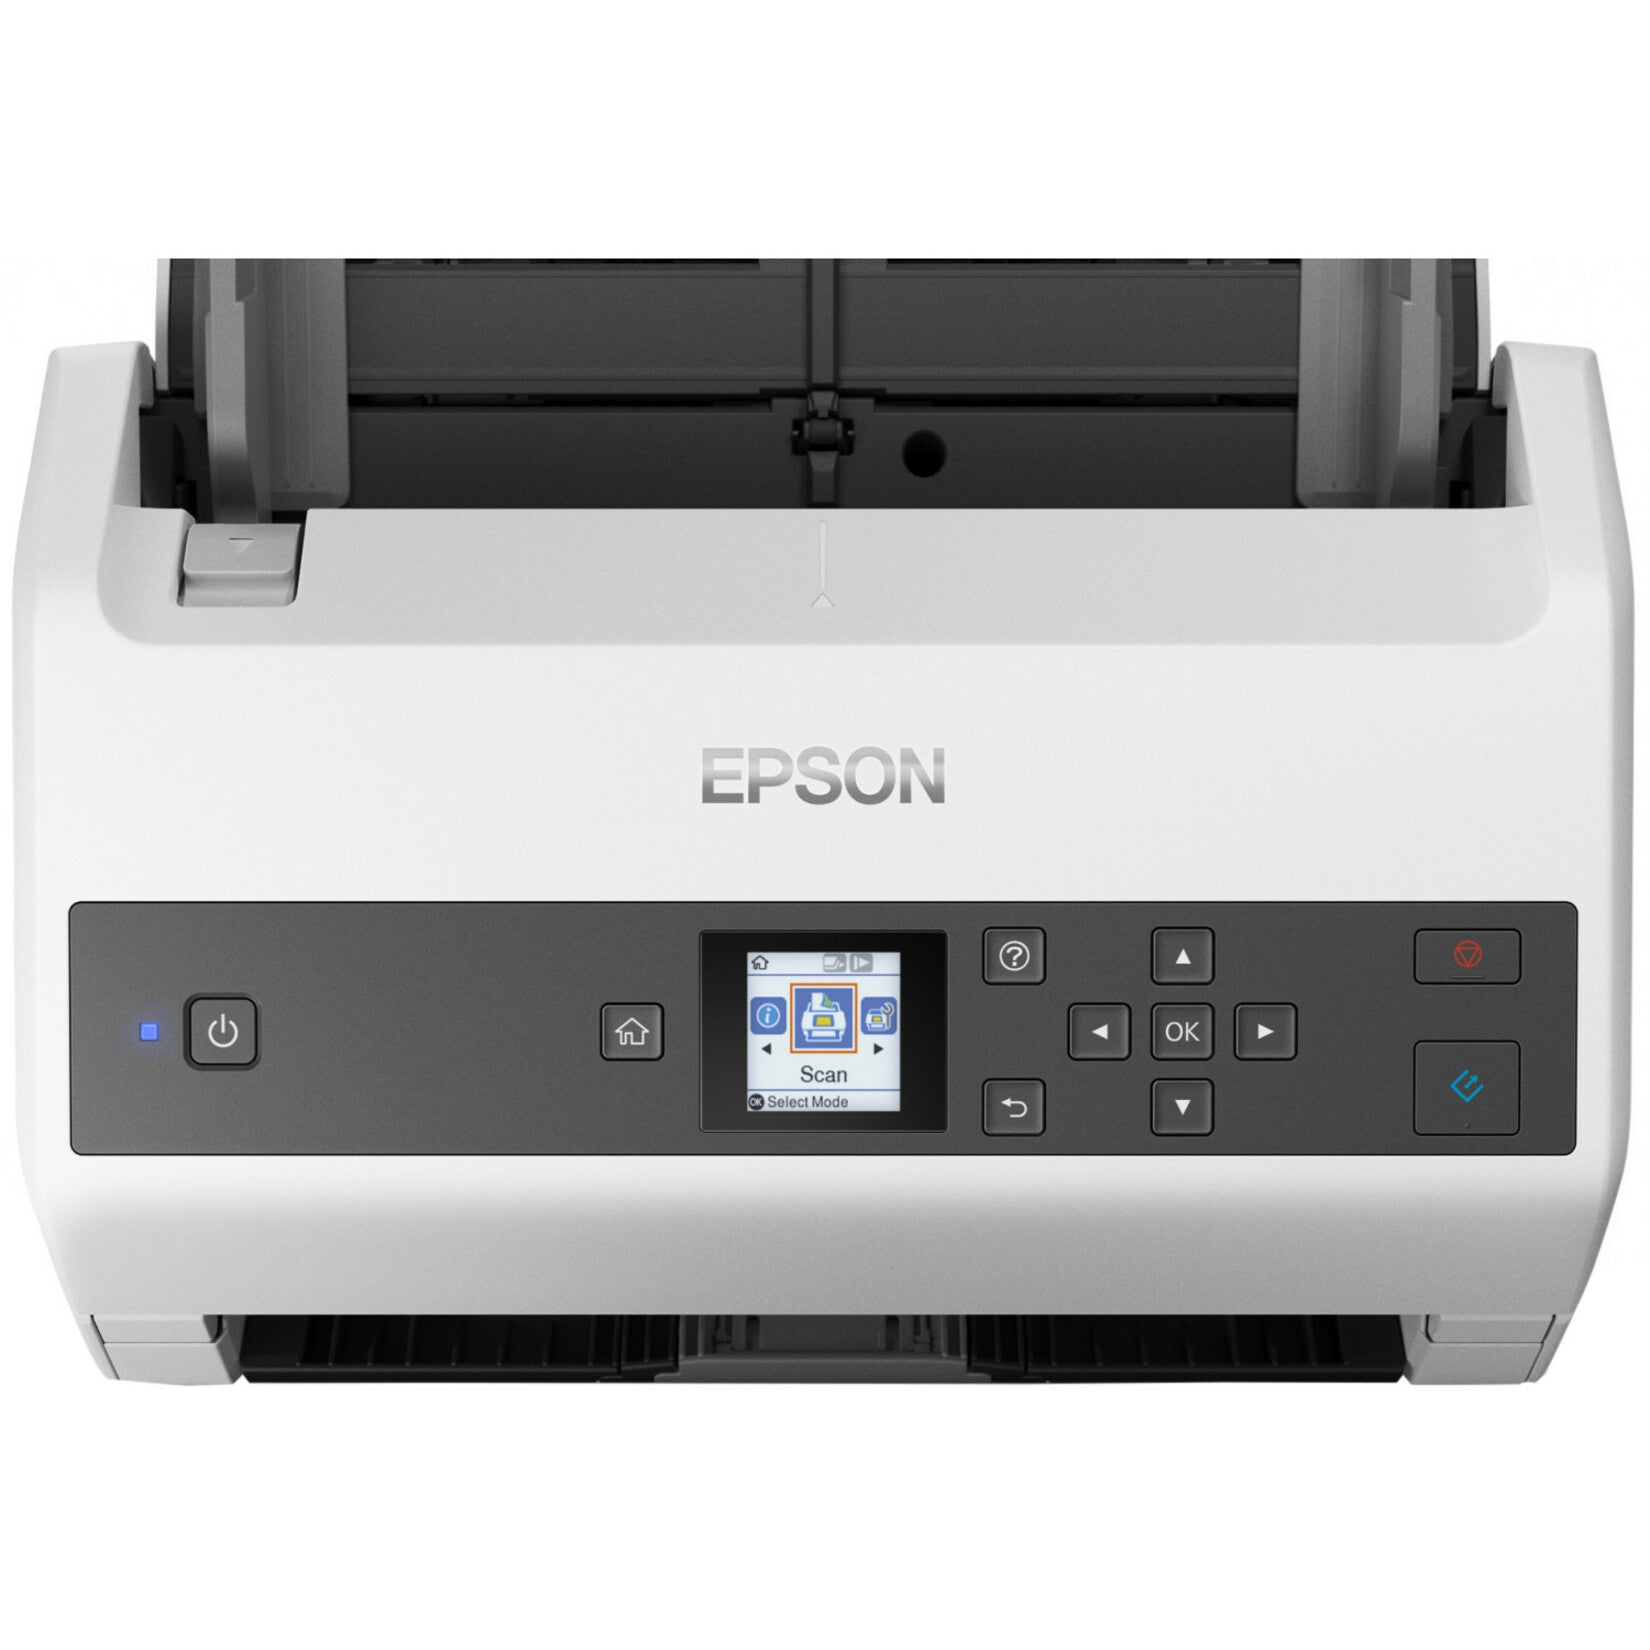 Epson B11B250201 WorkForce DS-870 Color Duplex Workgroup Document Scanner, 600 dpi Optical, 100 Sheets ADF Capacity